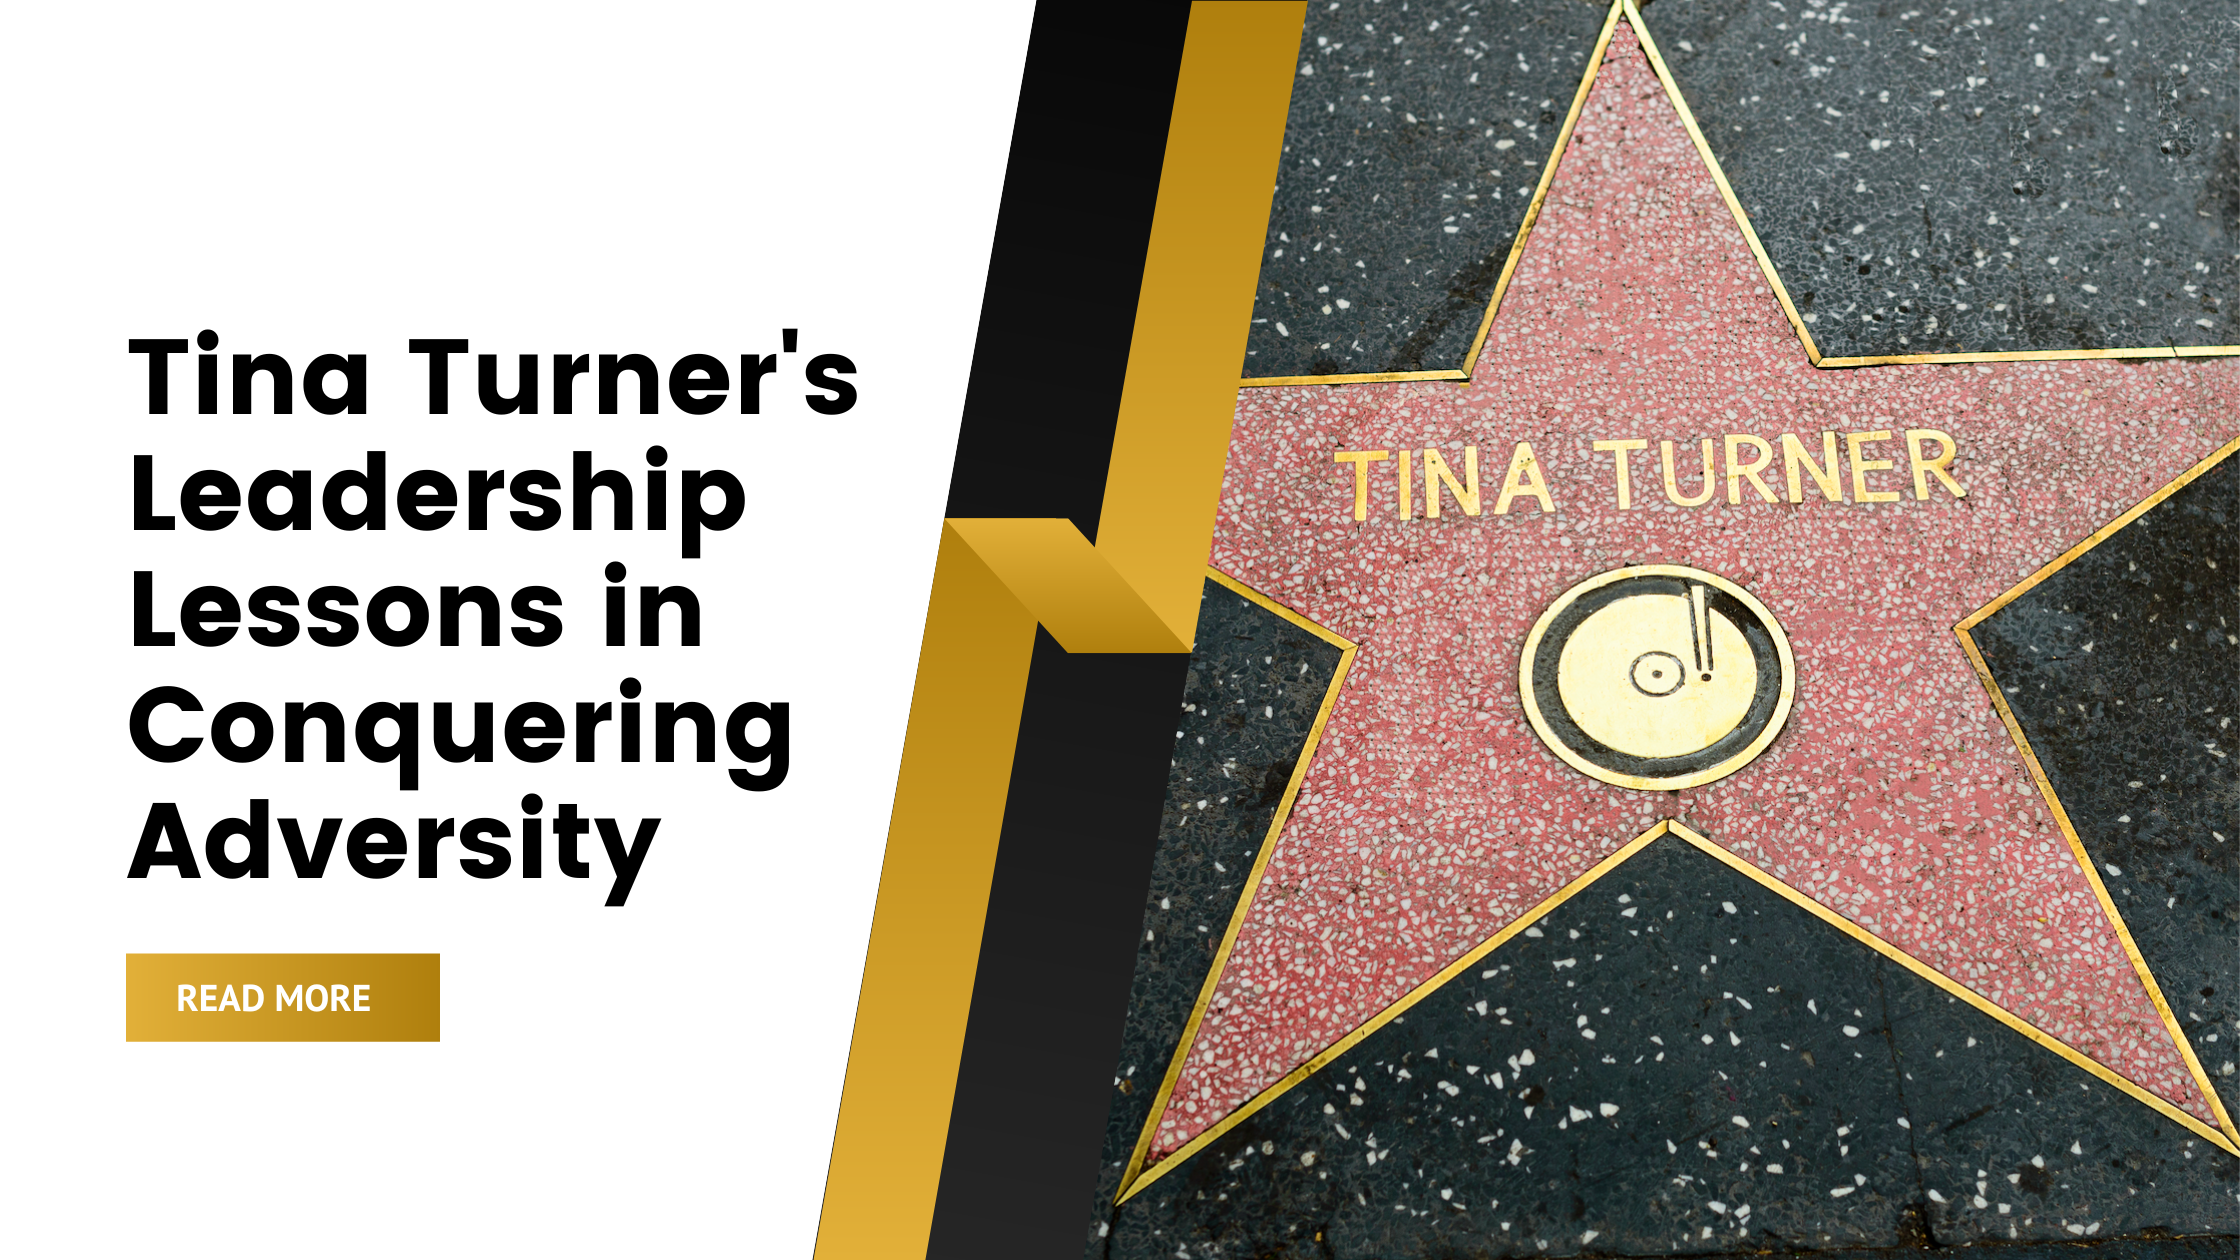 Tina Turner's Leadership Lessons in Conquering Adversity